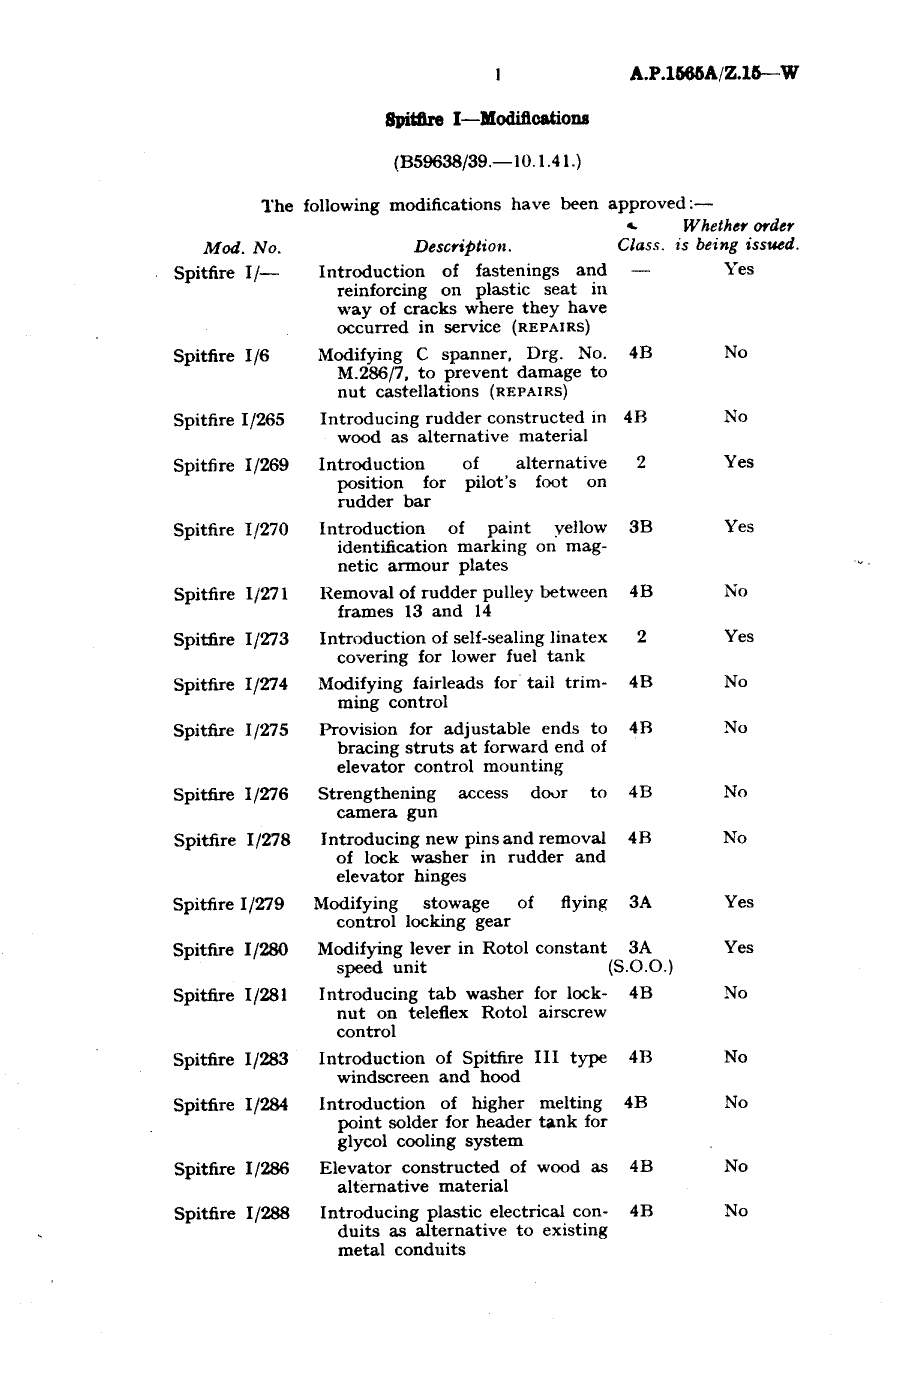 Sample page 1 from AirCorps Library document: Spitfire I Modifications 6, 265, 269, 270, 271, 273, 274, 275, 276, 278, 279, 280, 281, 283, 284, 286, 288, and 303